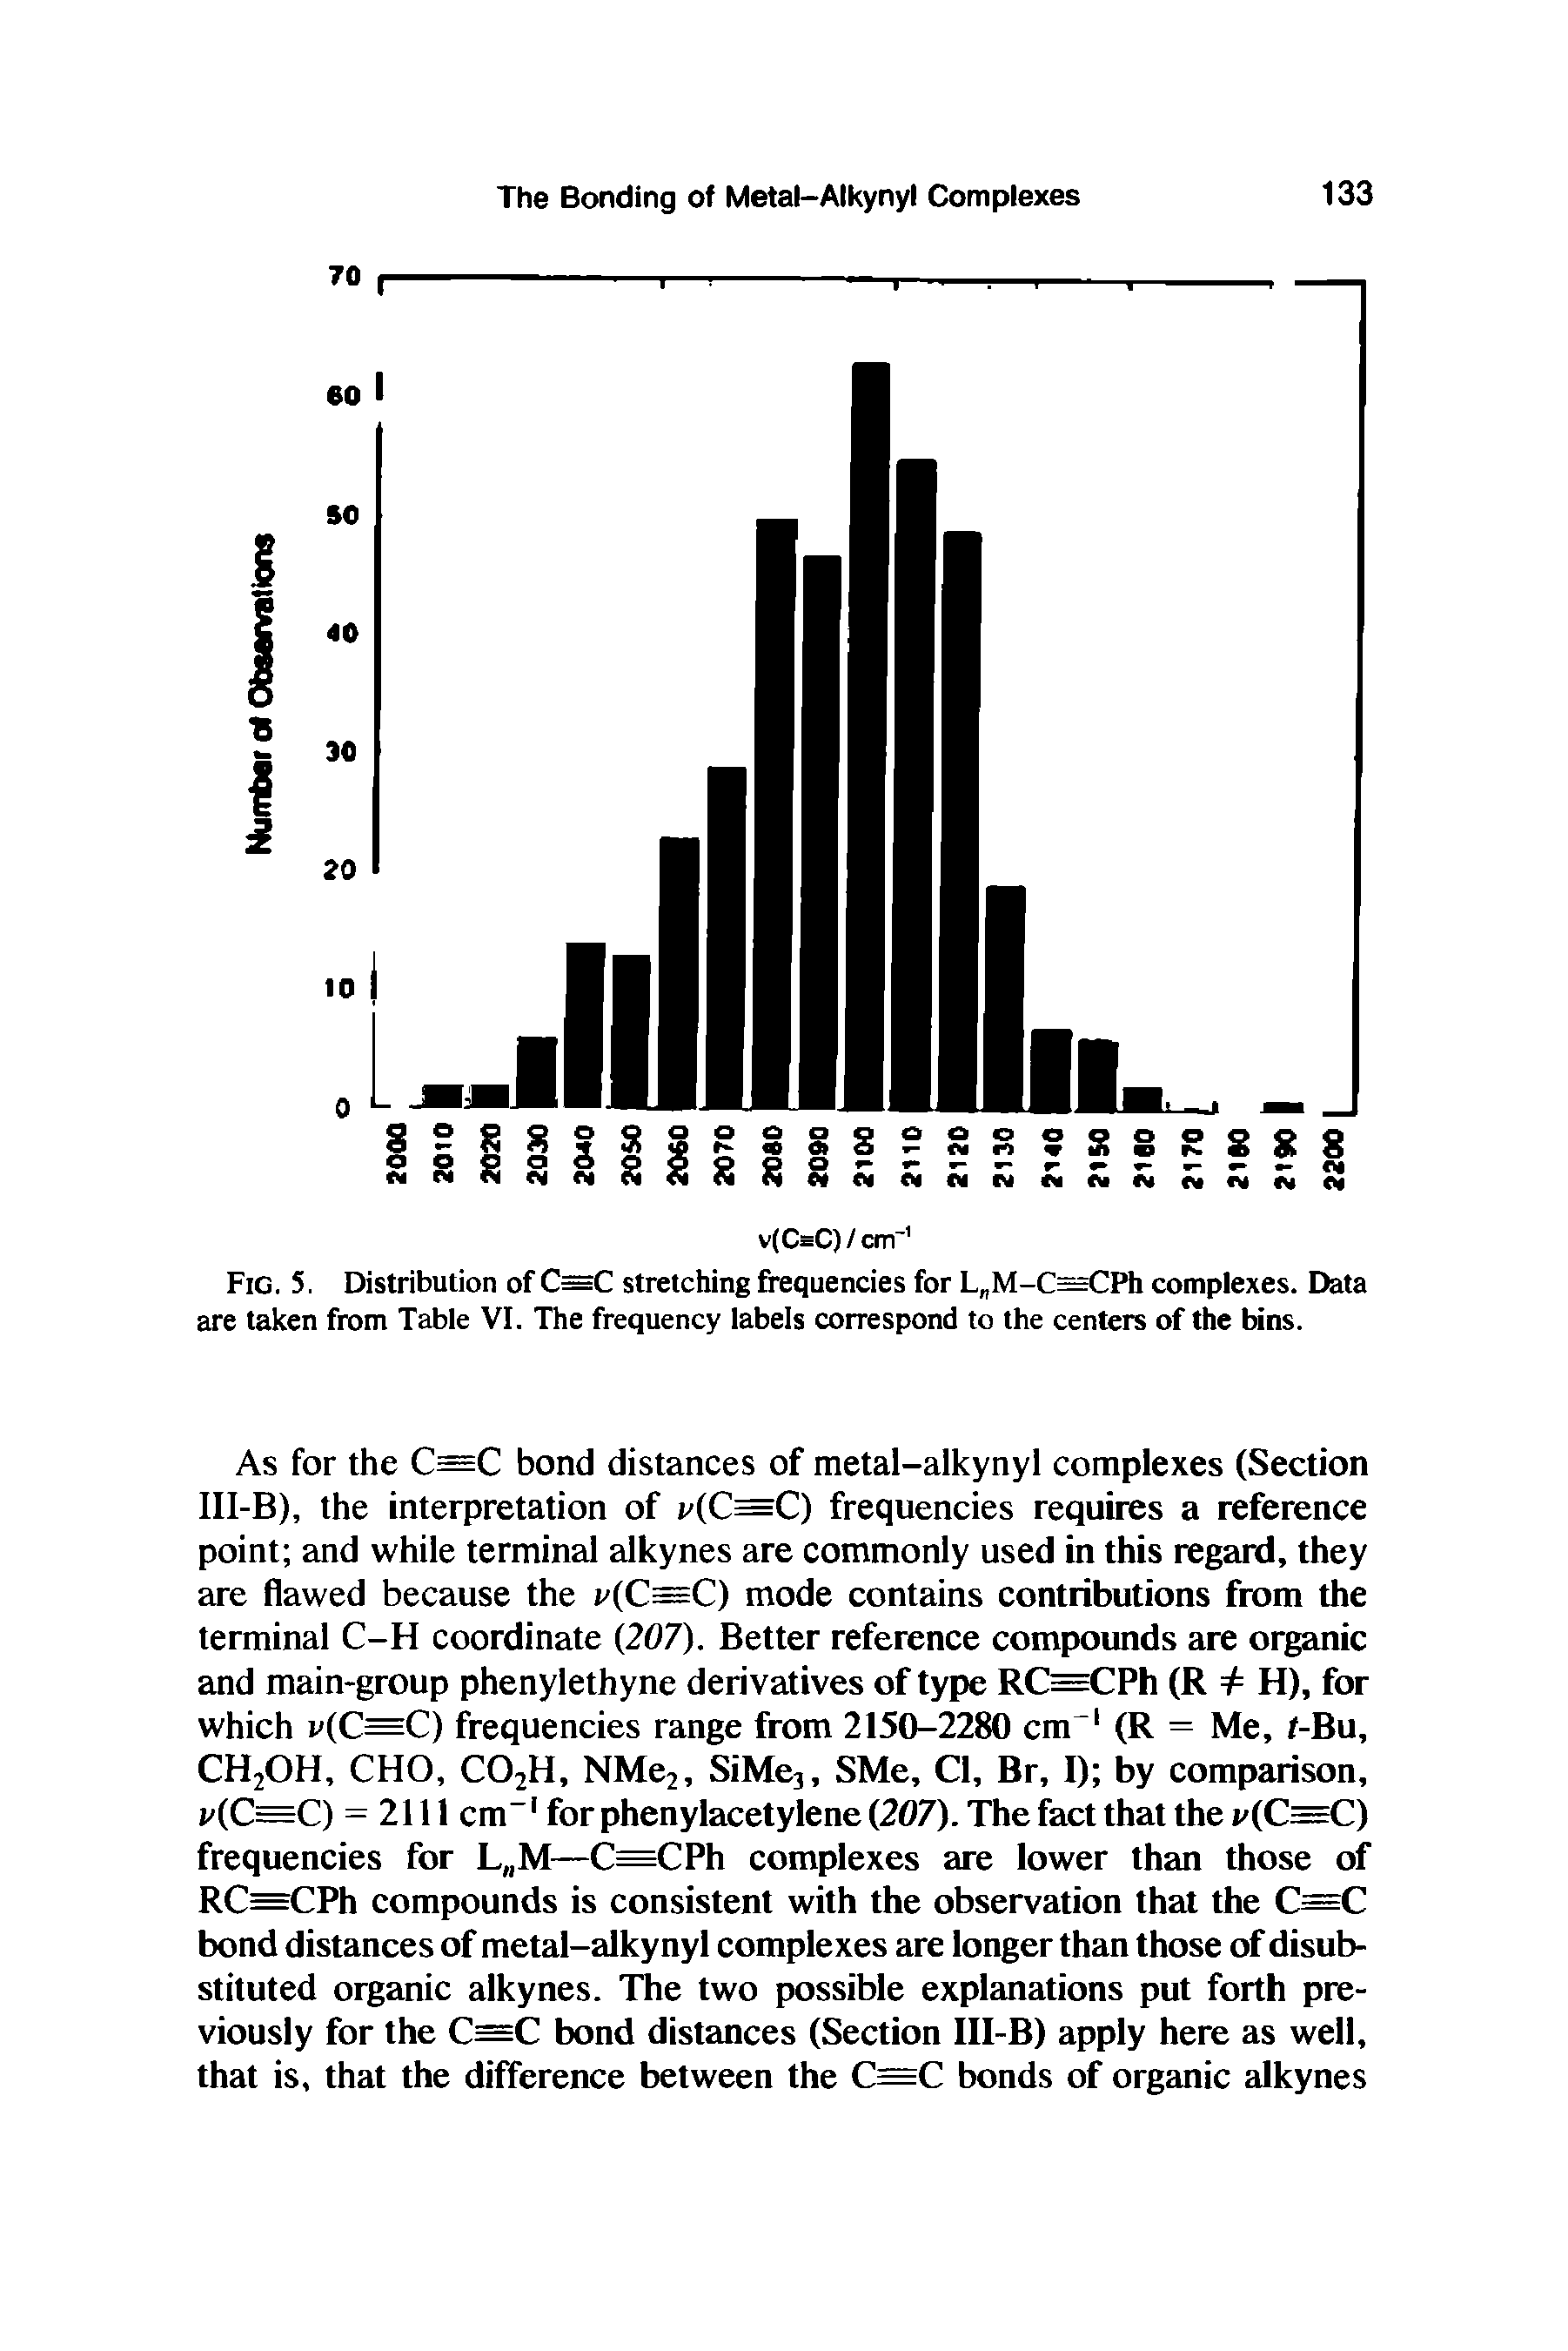 Fig. 5. Distribution of C C stretching frequencies for L M-C=CPh complexes. Data are taken from Table VI. The frequency labels correspond to the centers of the bins.